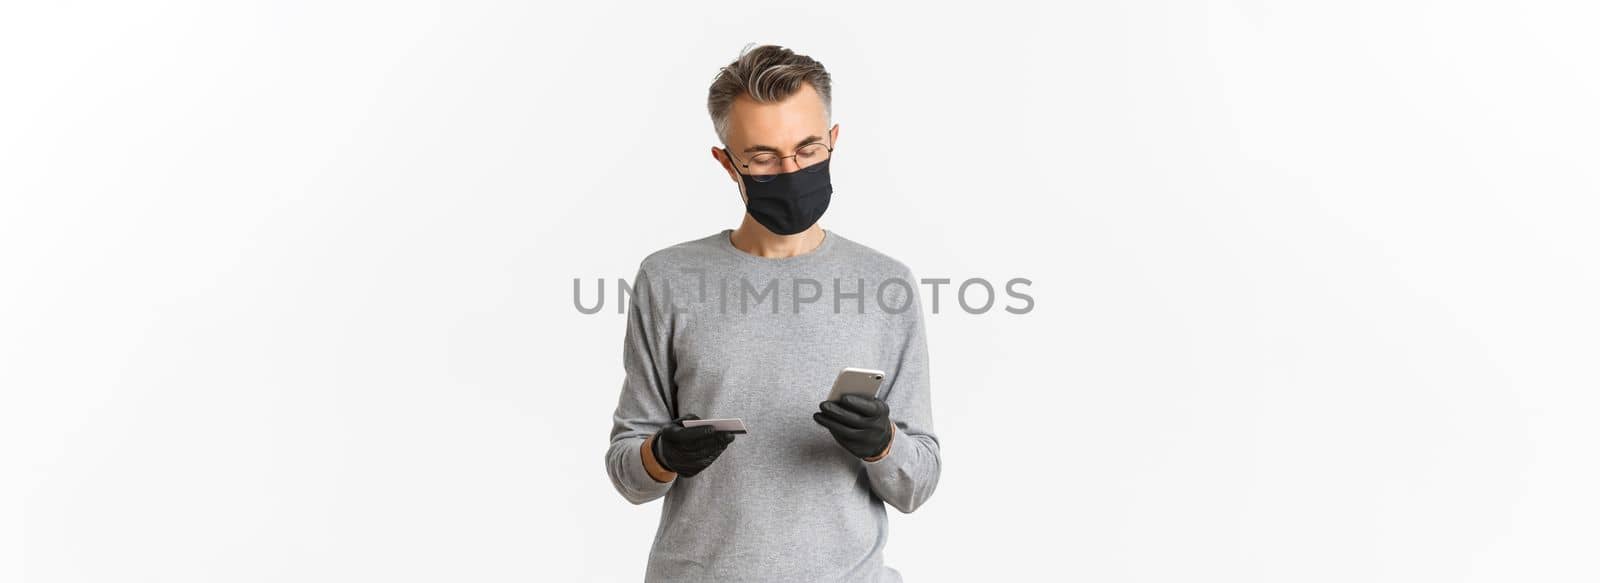 Concept of covid-19, social distancing and lifestyle. Image of handsome middle-aged man in medical mask, gloves and glasses, making online order using credit card and mobile phone.